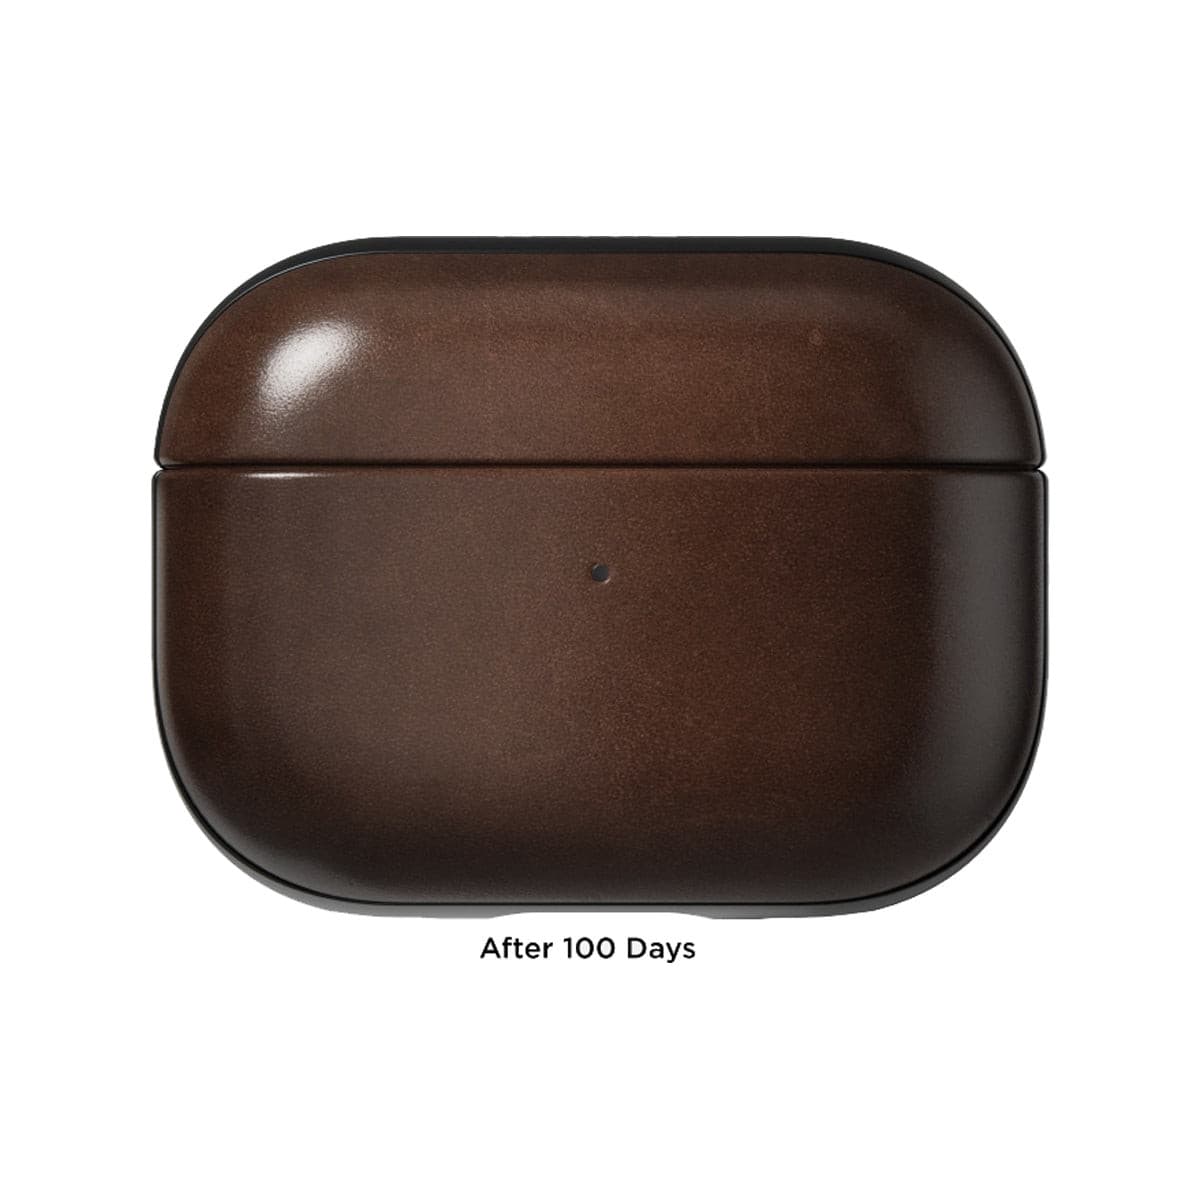 Nomad Modern Leather Case for AirPods Pro 2 - Rustic Brown Horween Leather.